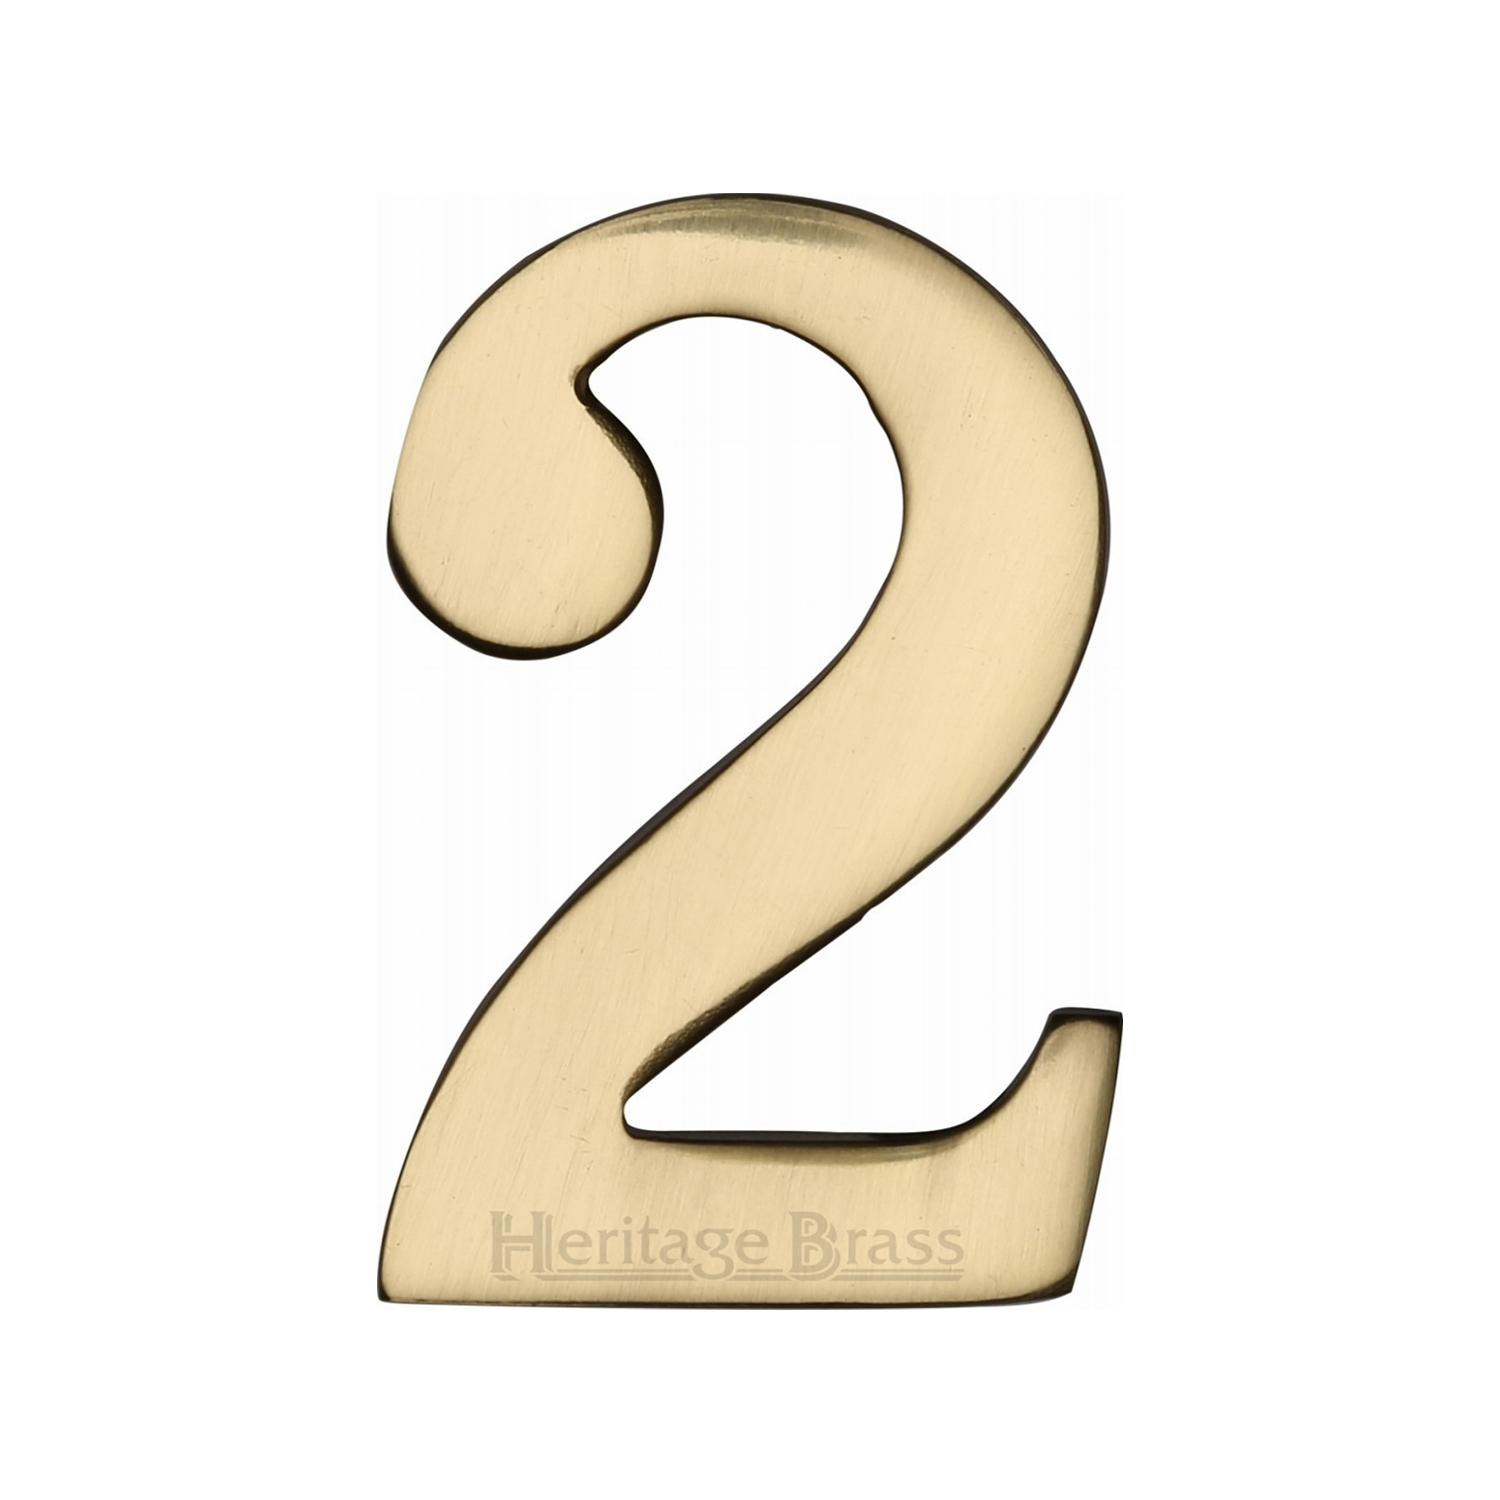 Heritage Brass Numeral 2 Self Adhesive 51mm (2")